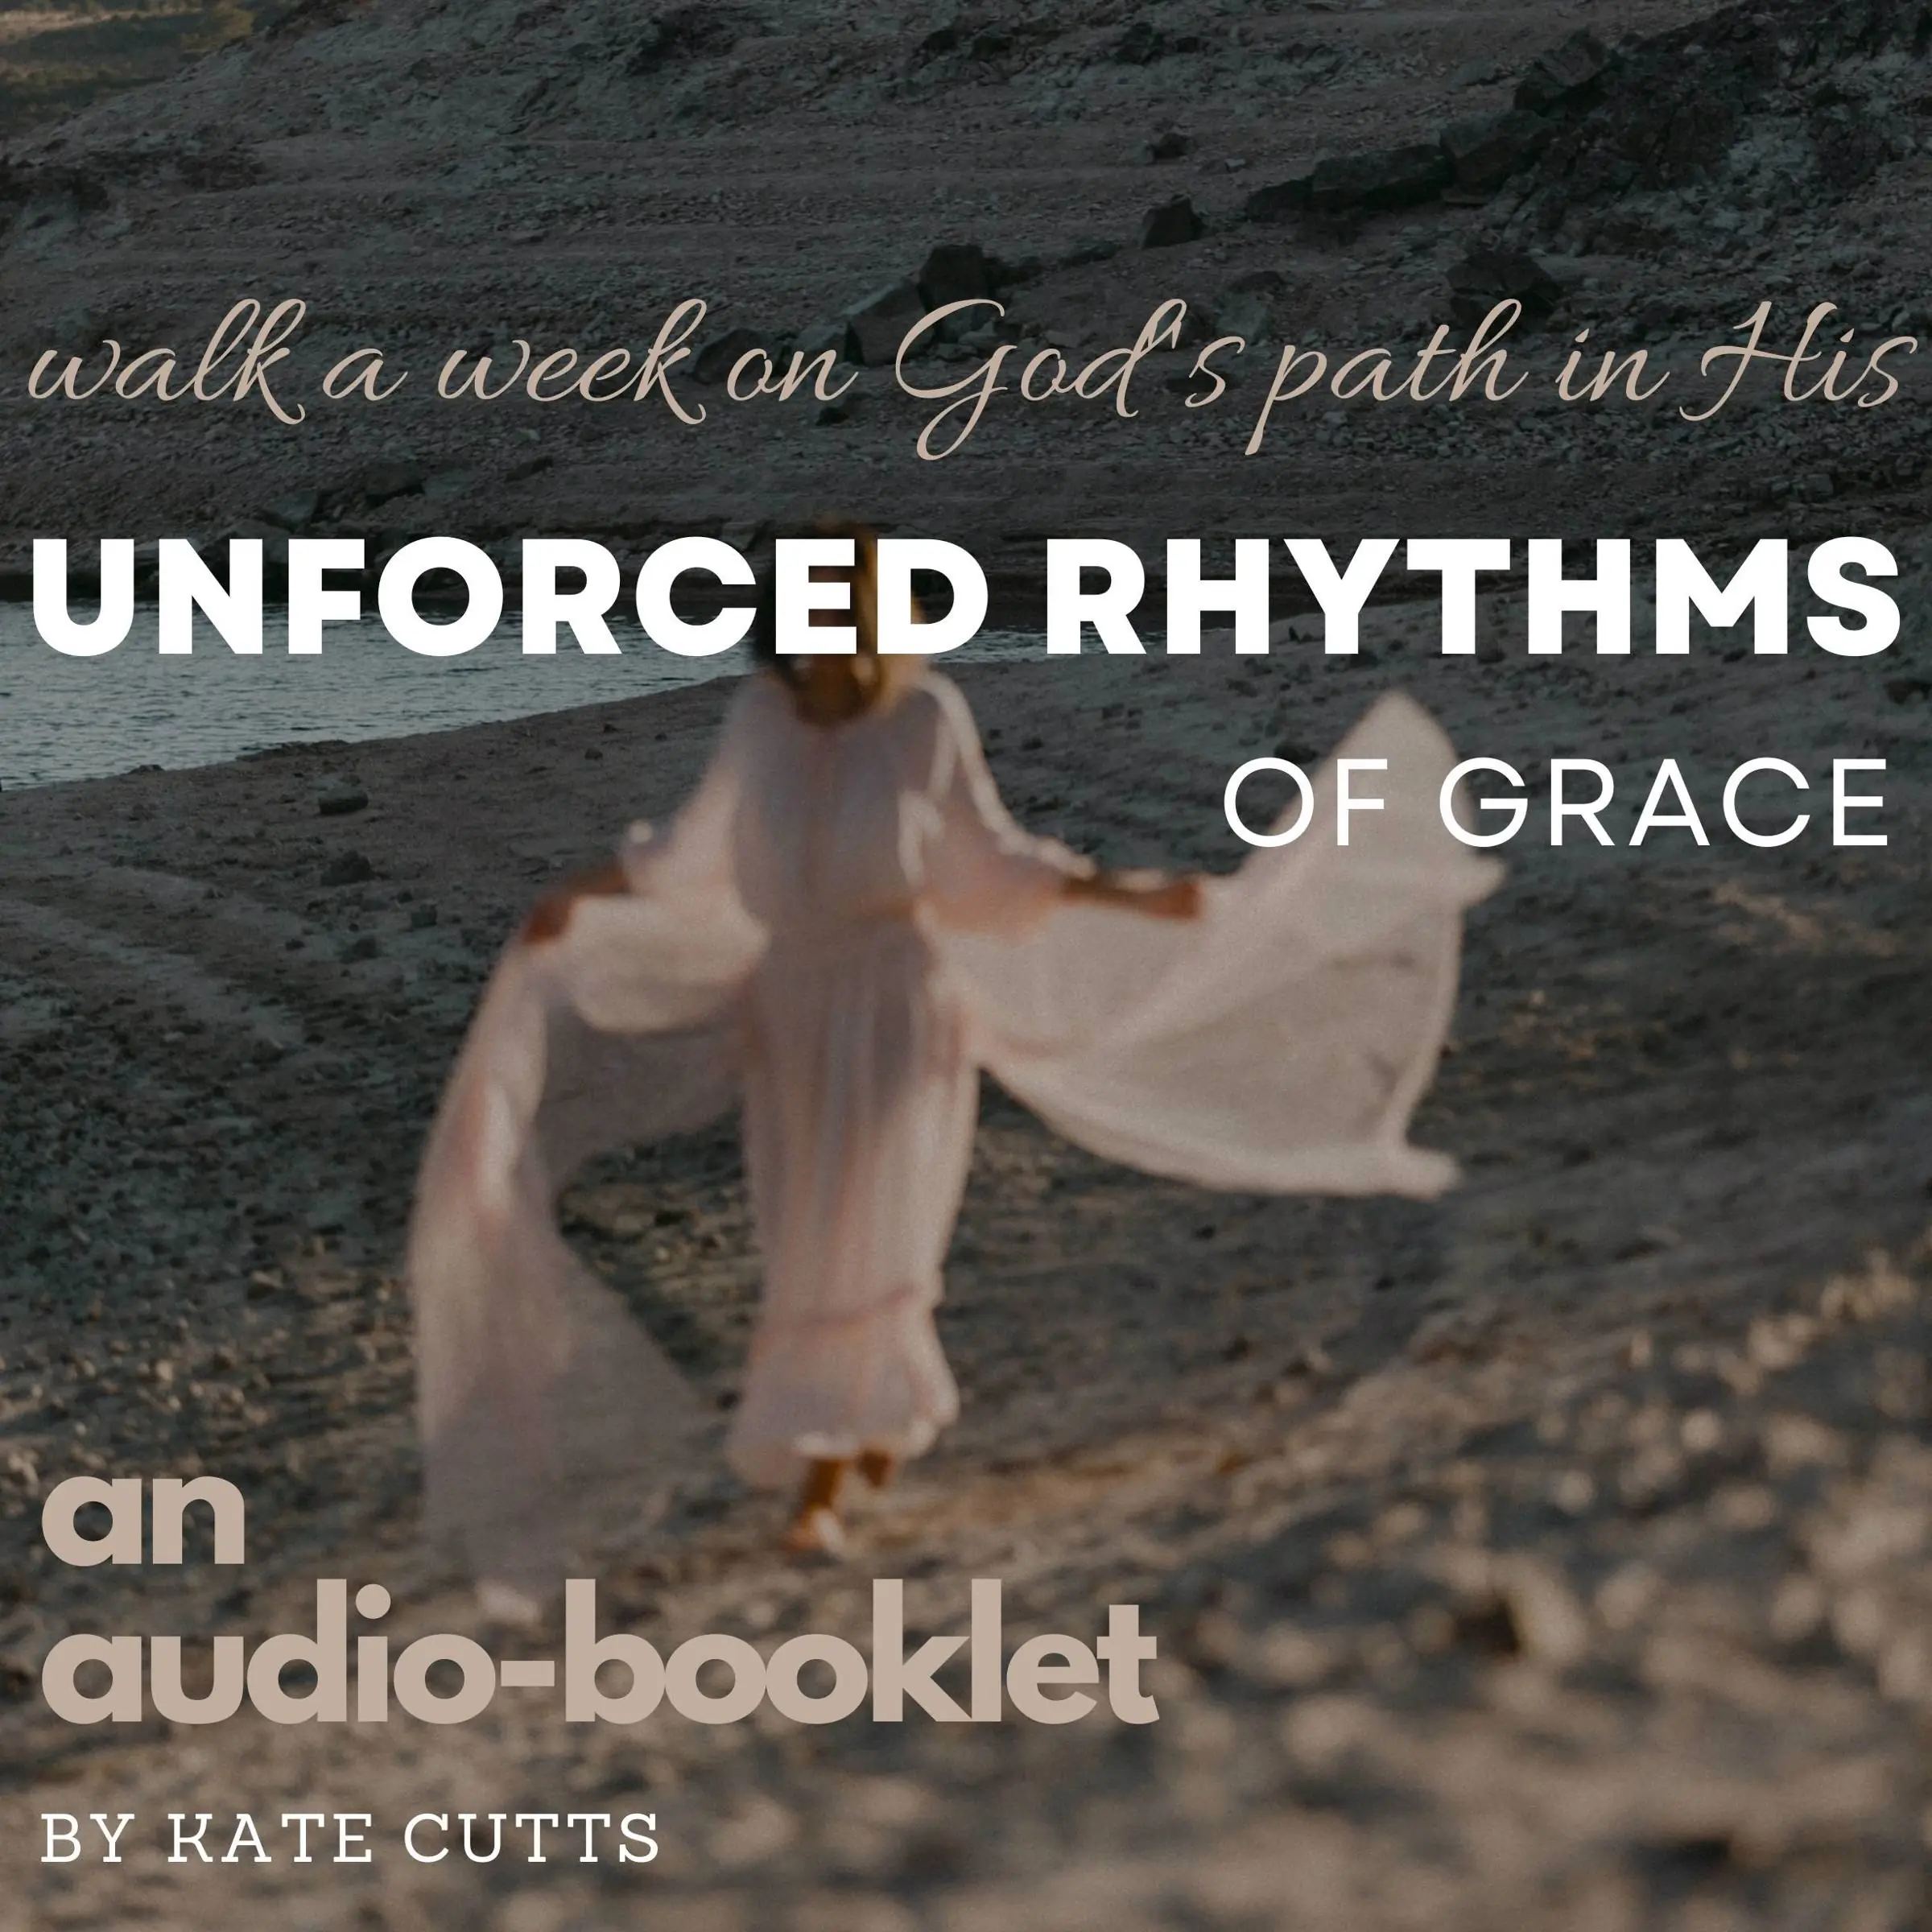 Unforced Rhythms of Grace Audiobook by Kate Cutts